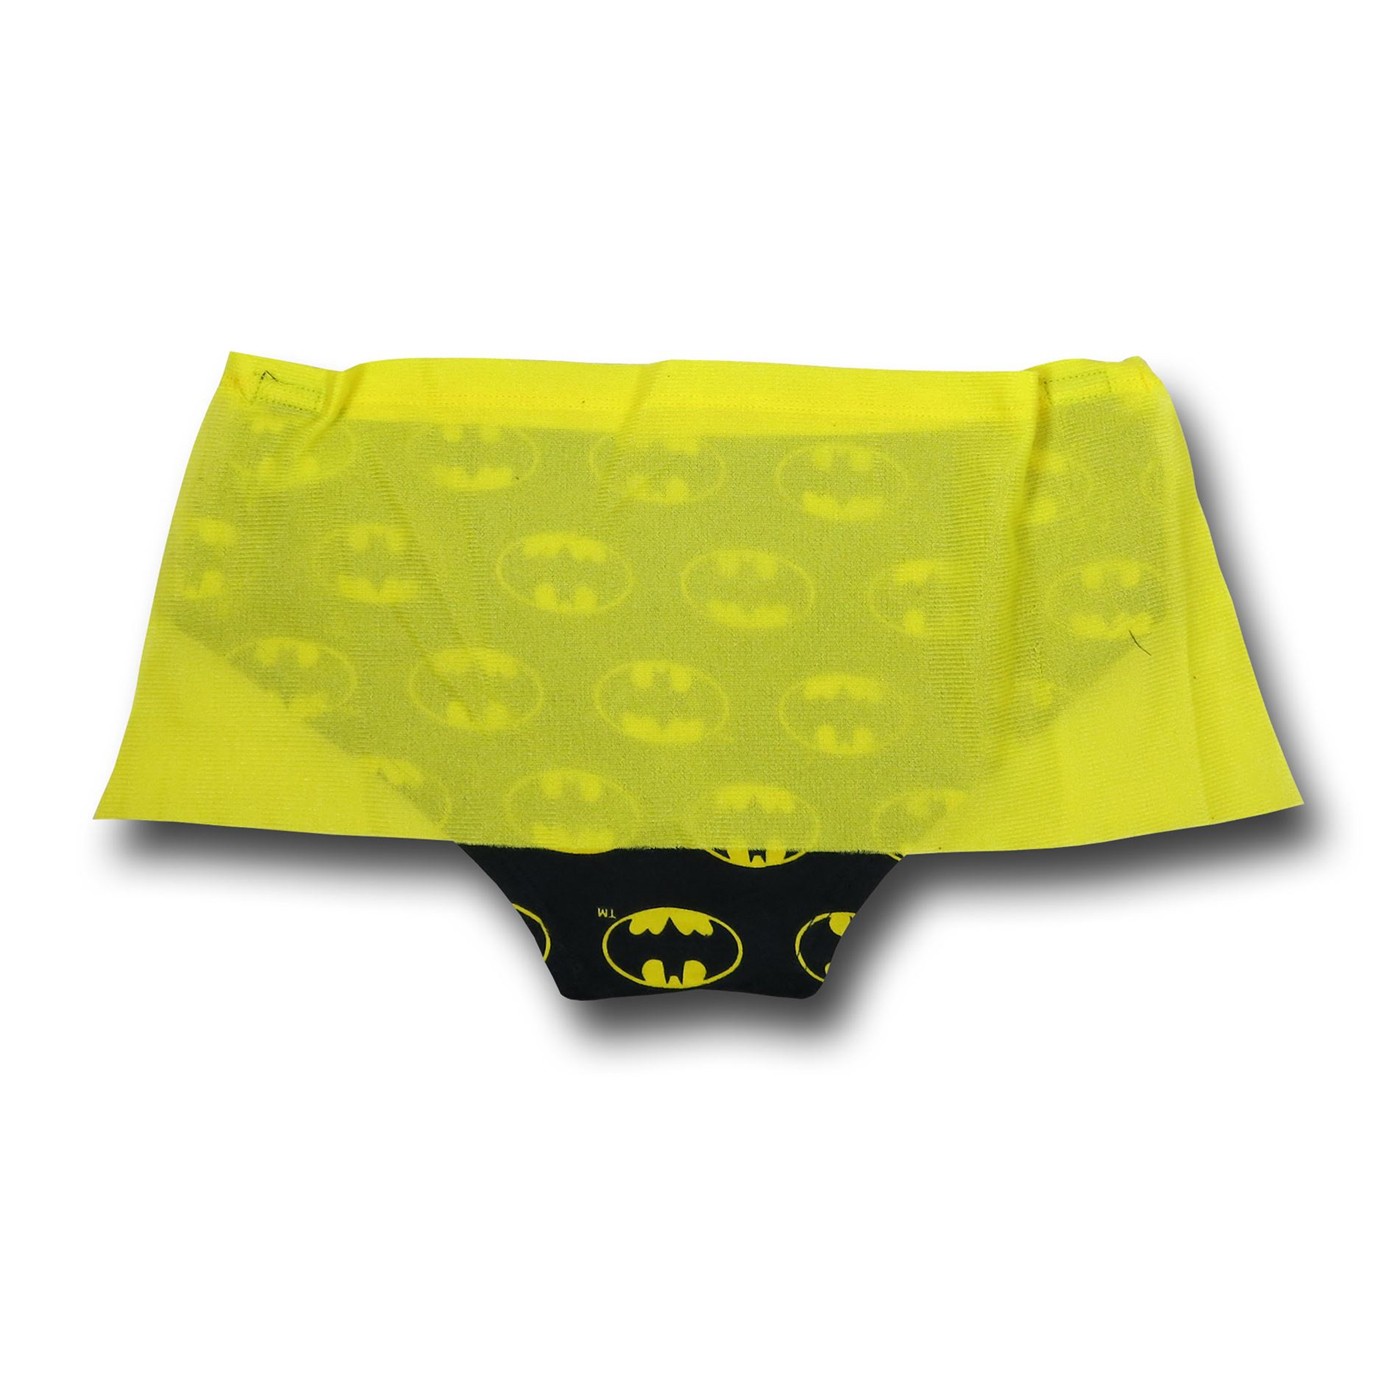 Batgirl Costume Women's Cami and Caped Panty Set